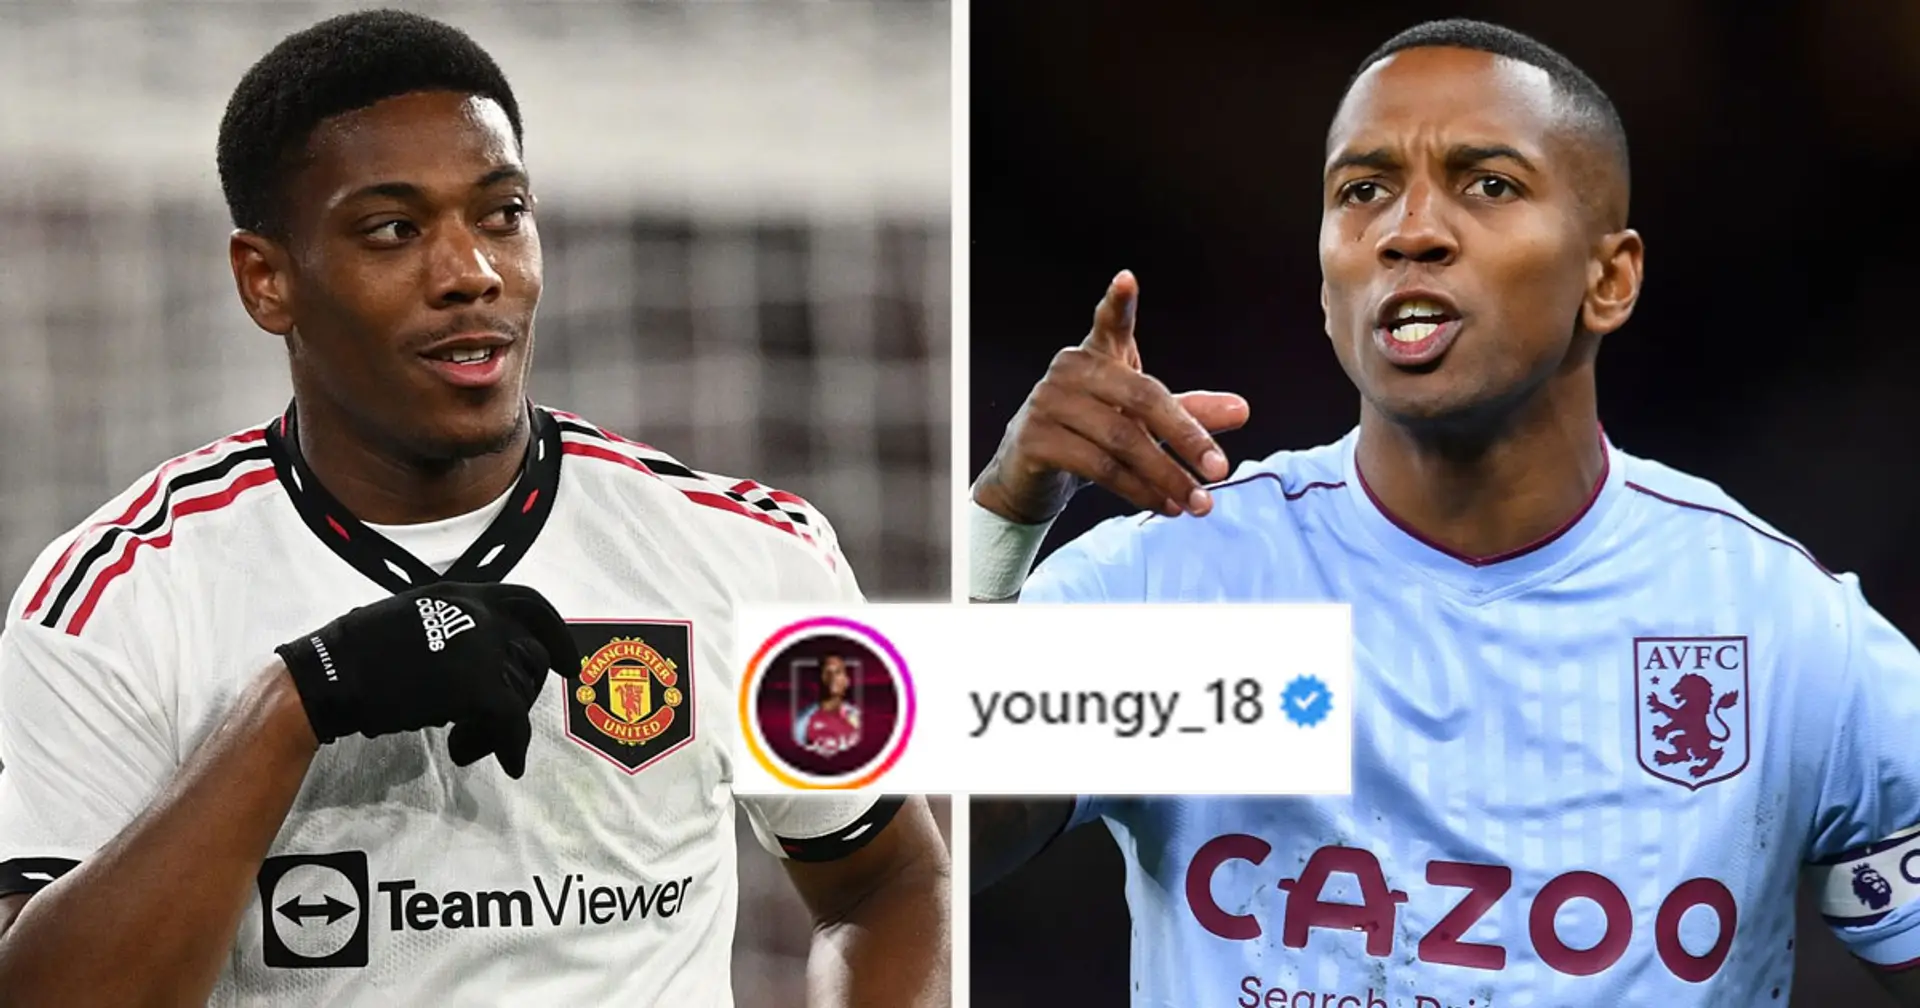 'About time you occupied the no.9 shirt': Ashley Young shares sweet exchange with Martial after pre-season friendly